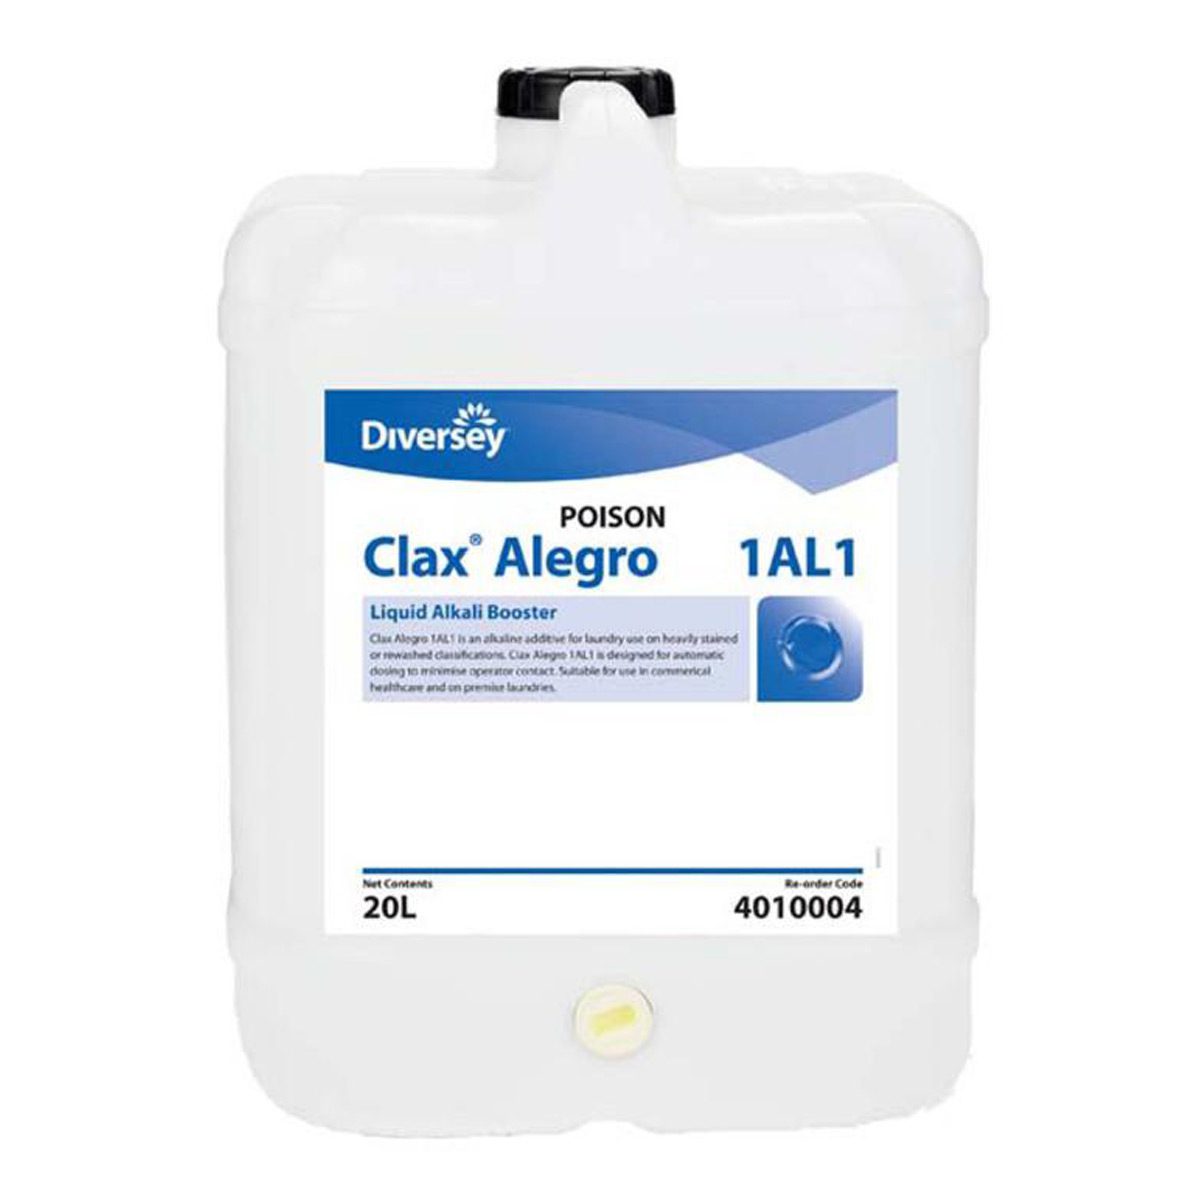 cleaning-products-laundry-diversey-clax-alegro-1al1-20L-litre-alkaline-additive-heavily-soiled-rewash-laundry-classifications-commercial-healthcare-laundries-heavily-soiled-vjs-distributors-4010024